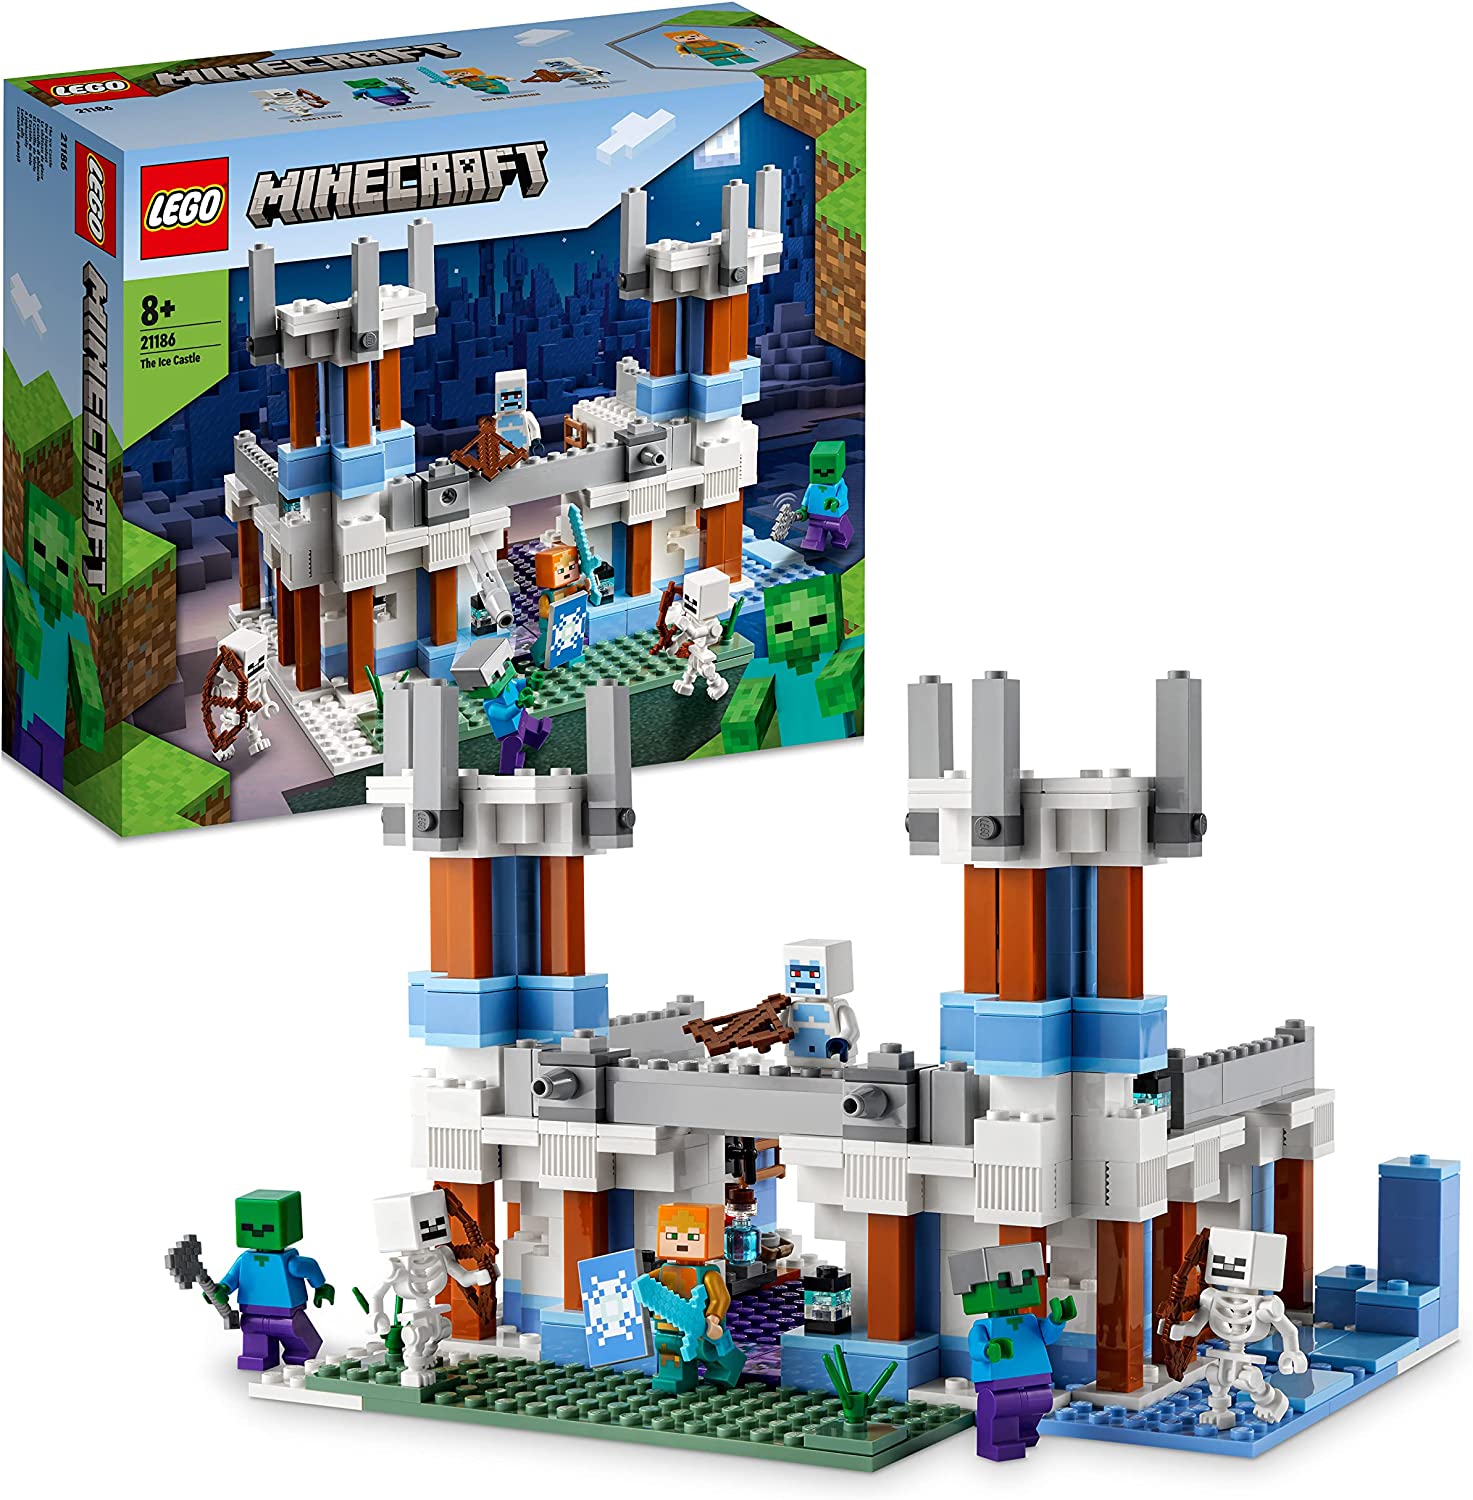 LEGO 21186 Minecraft The Ice Palace Set, Toy Castle with Skeleton and Zombie Figures, Gift for Children from 8 Years